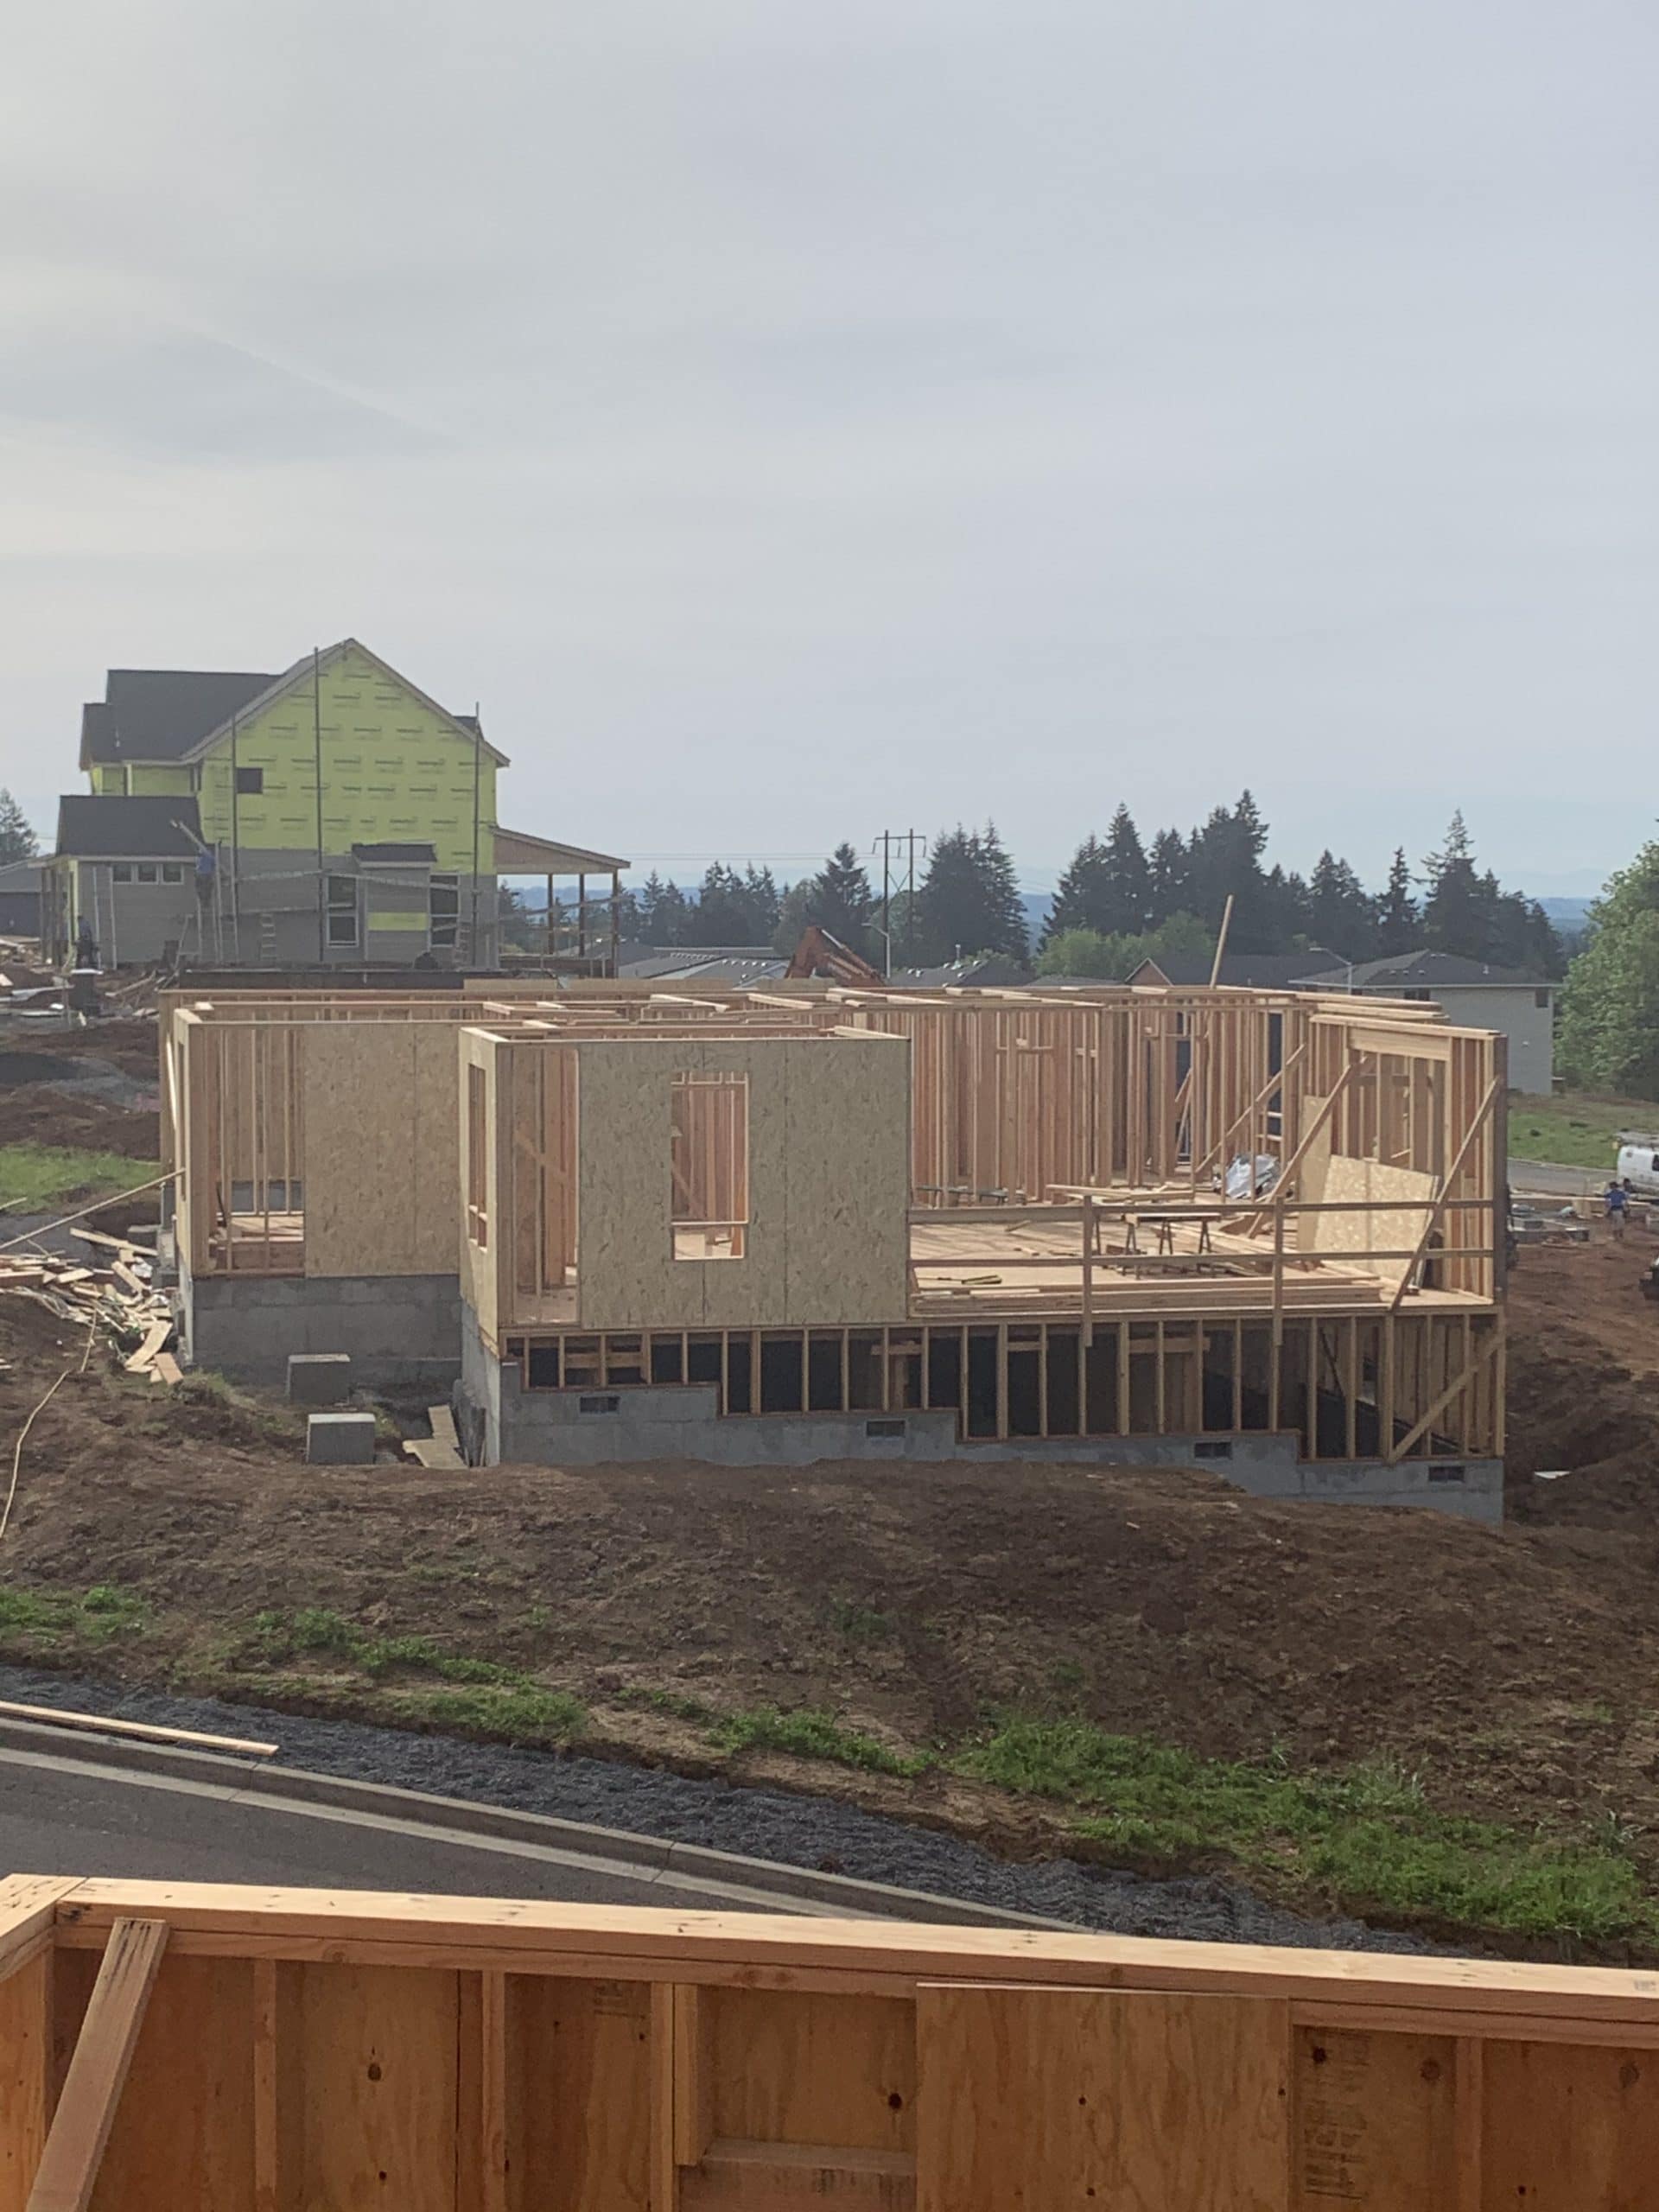 Residential Ground-up Construction St. Helens Oregon